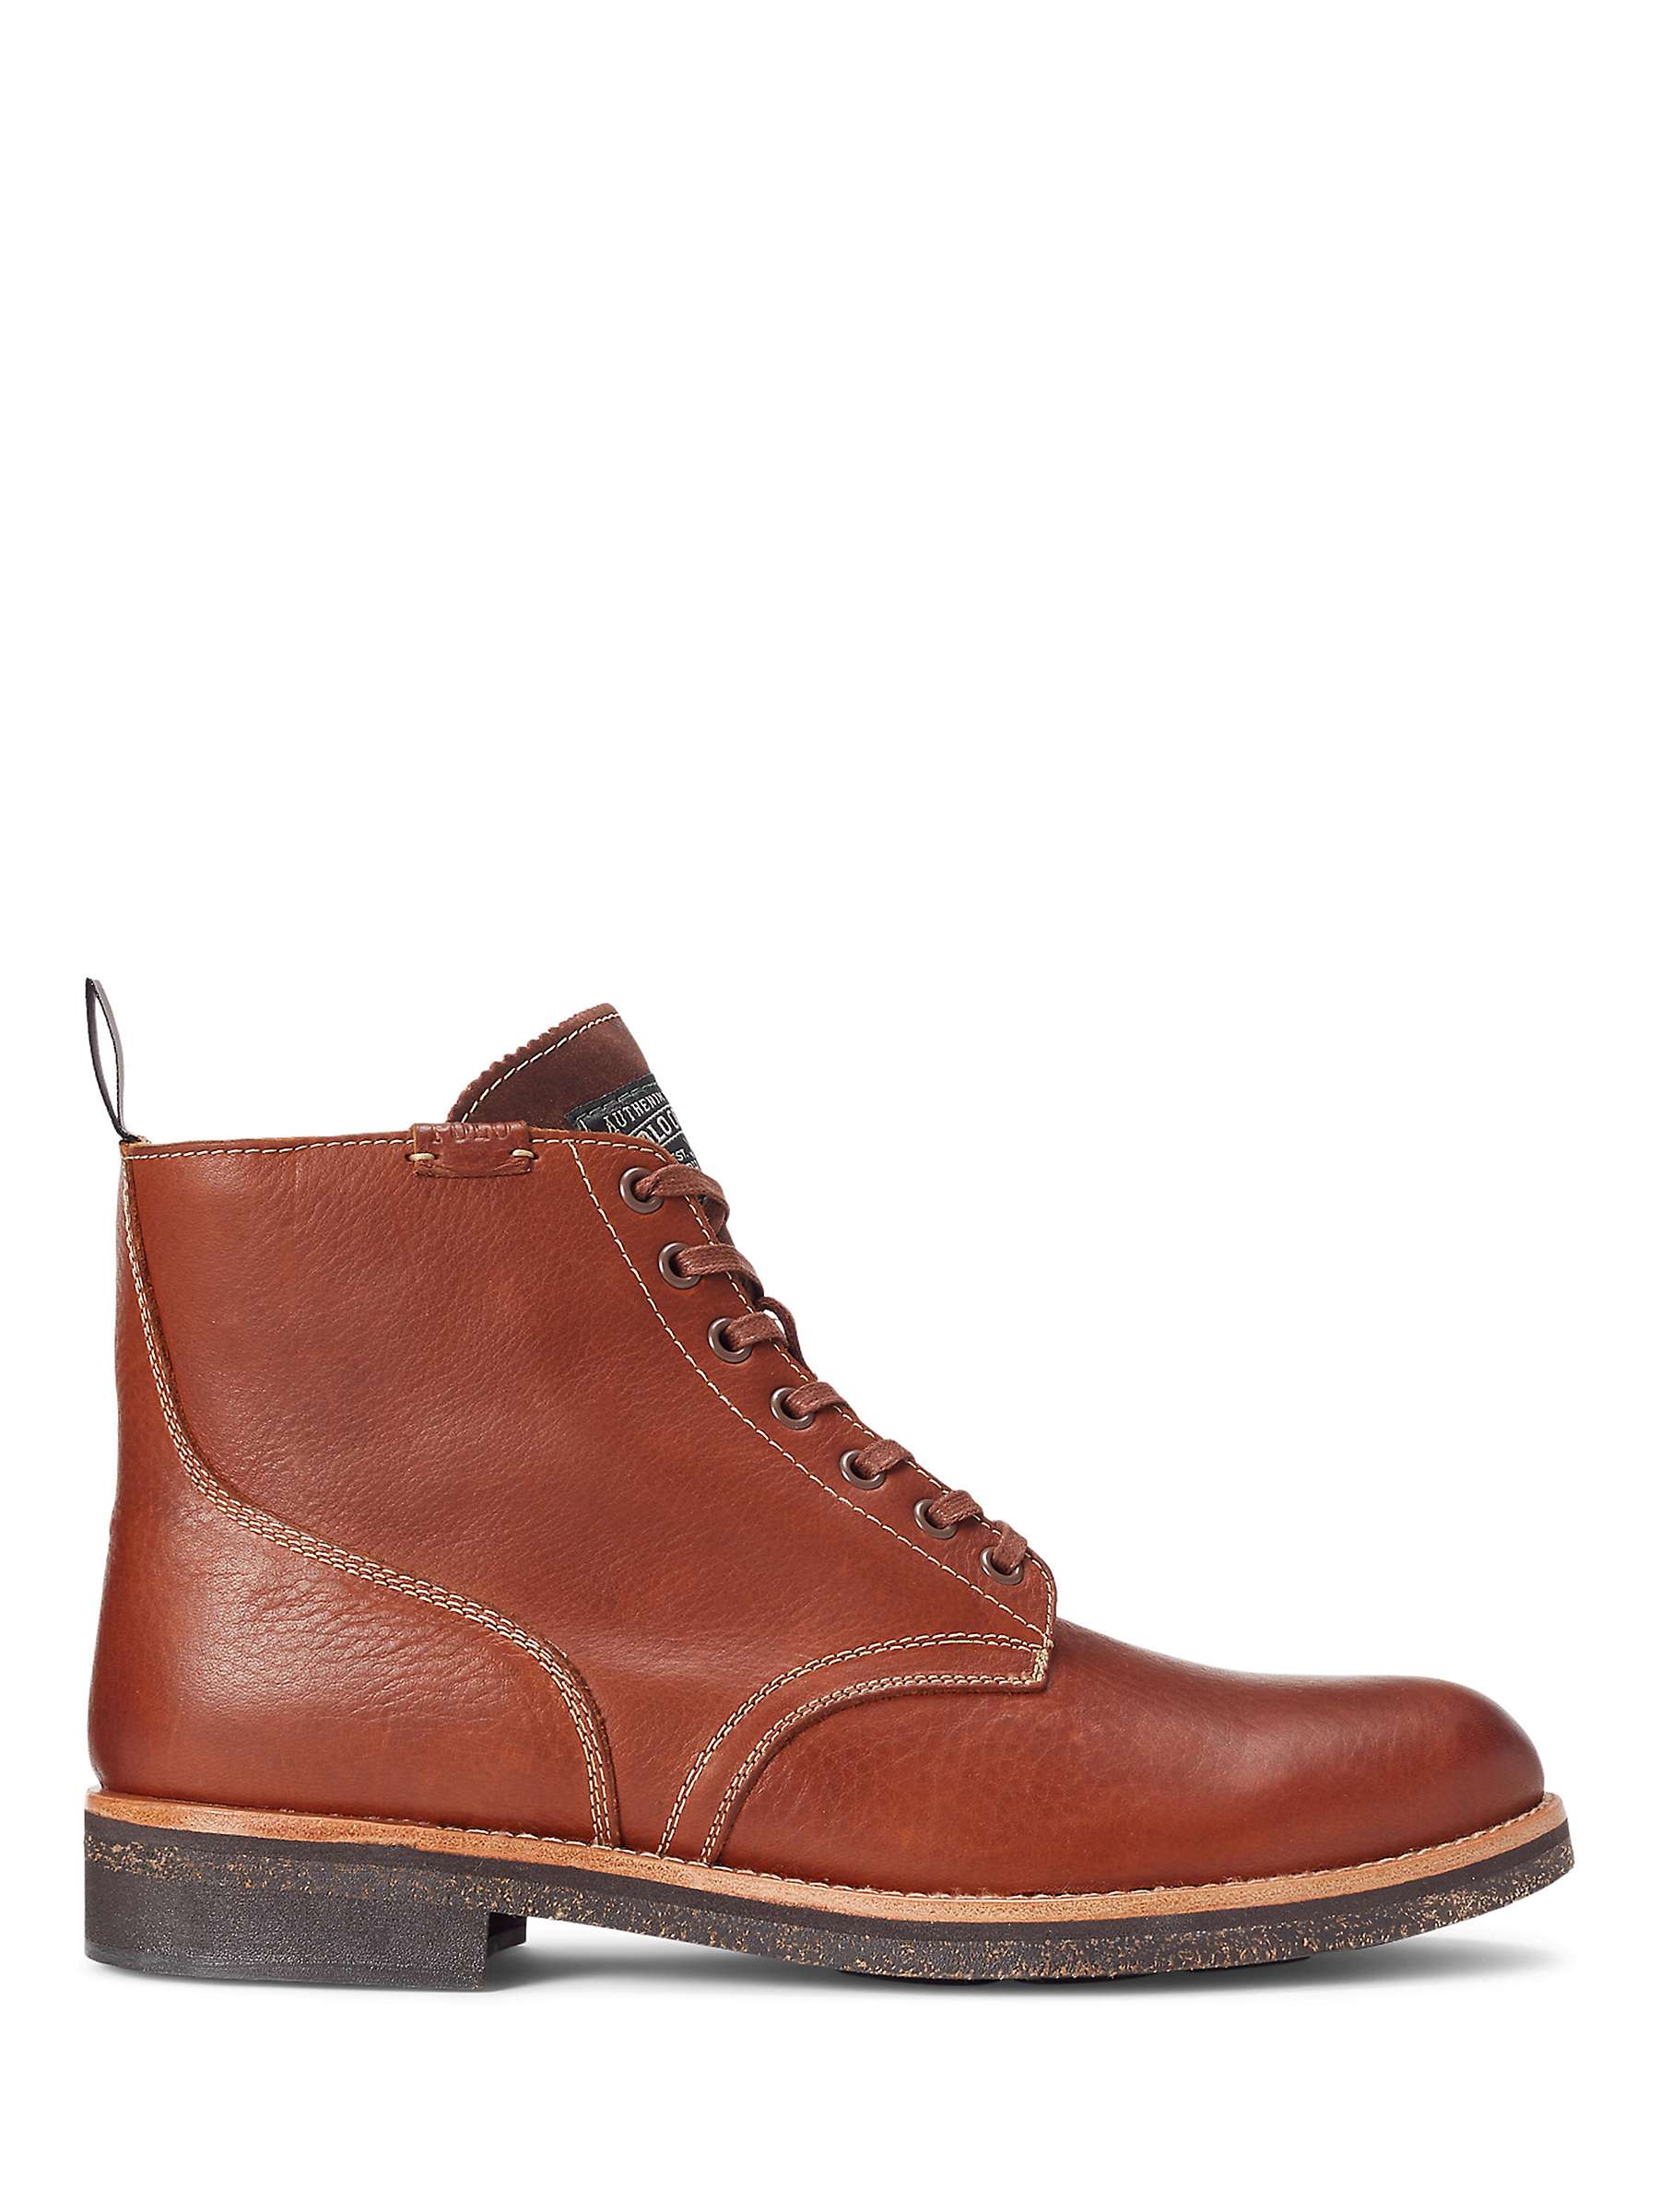 Buy Ralph Lauren Tumbled Leather Boots, Brown Online at johnlewis.com